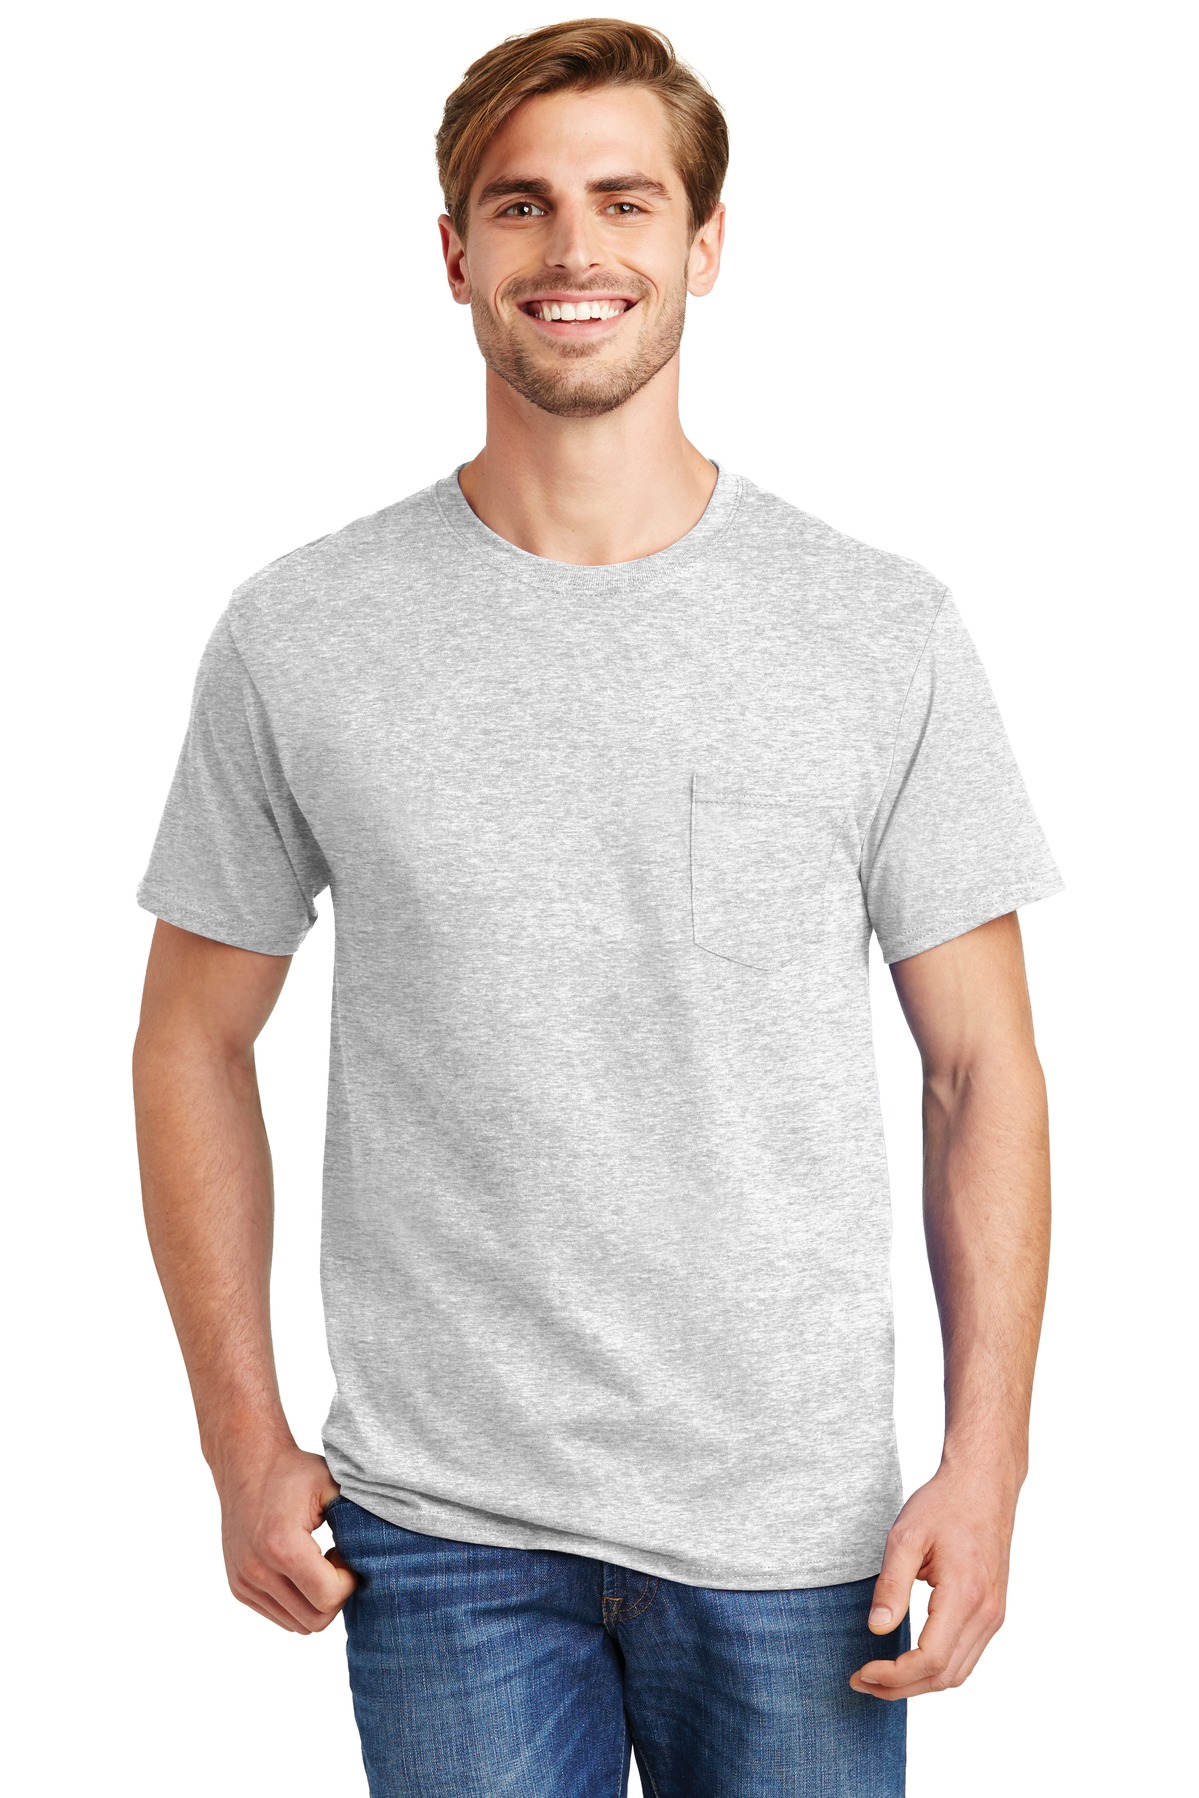 Hanes - Authentic 100% Cotton T-Shirt with Pocket....